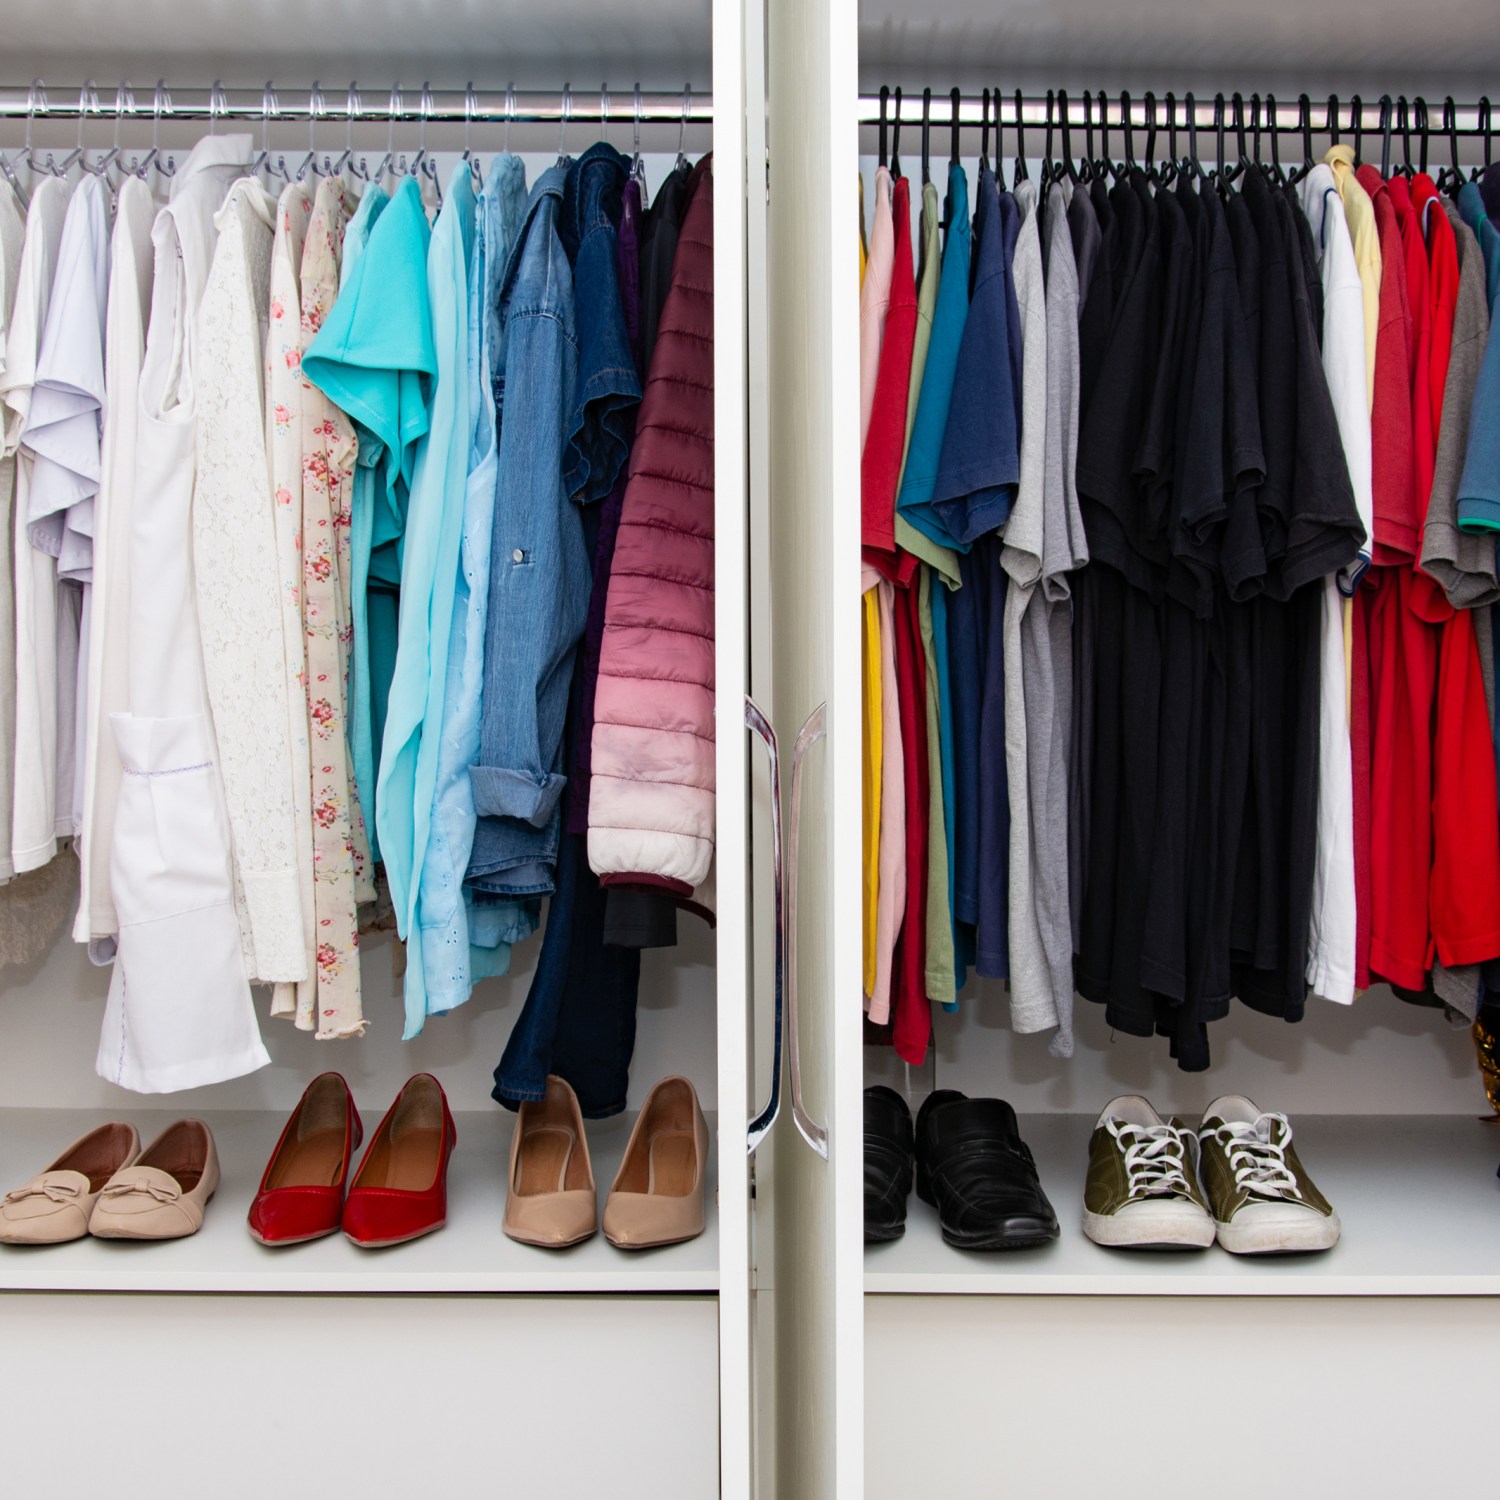 A custom built closet for a married couple with color organized clothing.